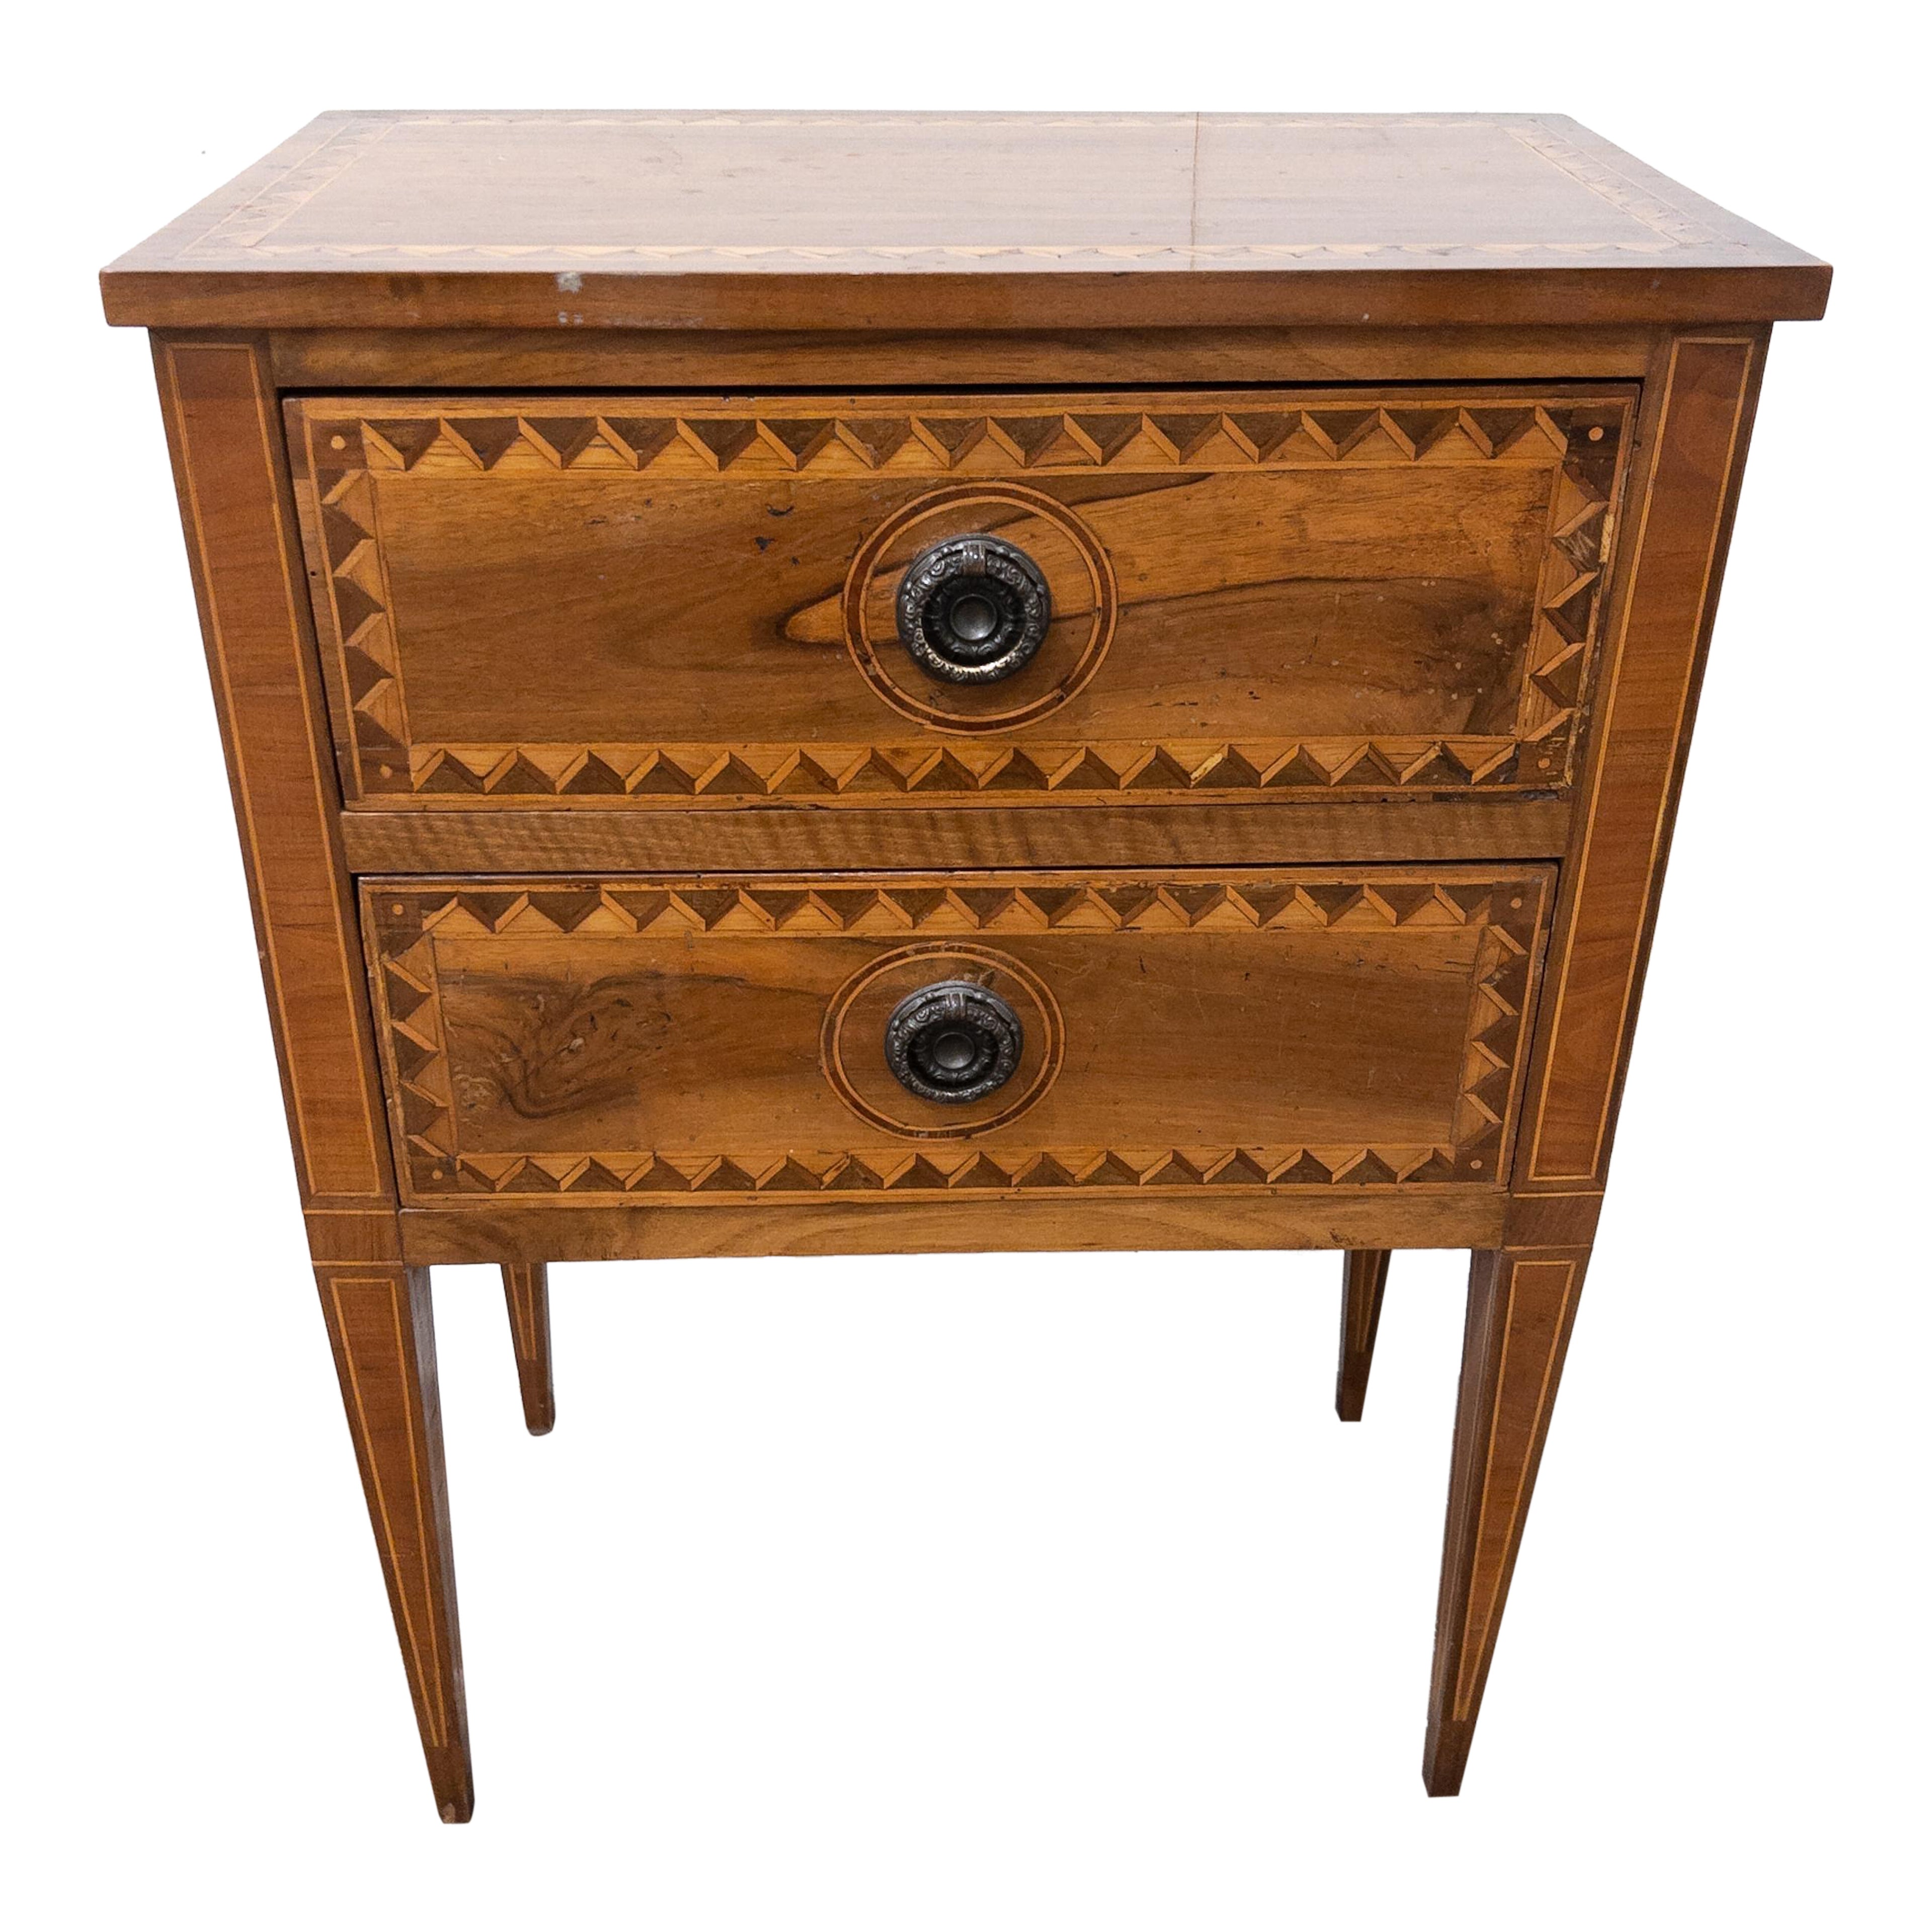 19th Century Two Drawer Small Fruitwood Commode with Marquetry Detail